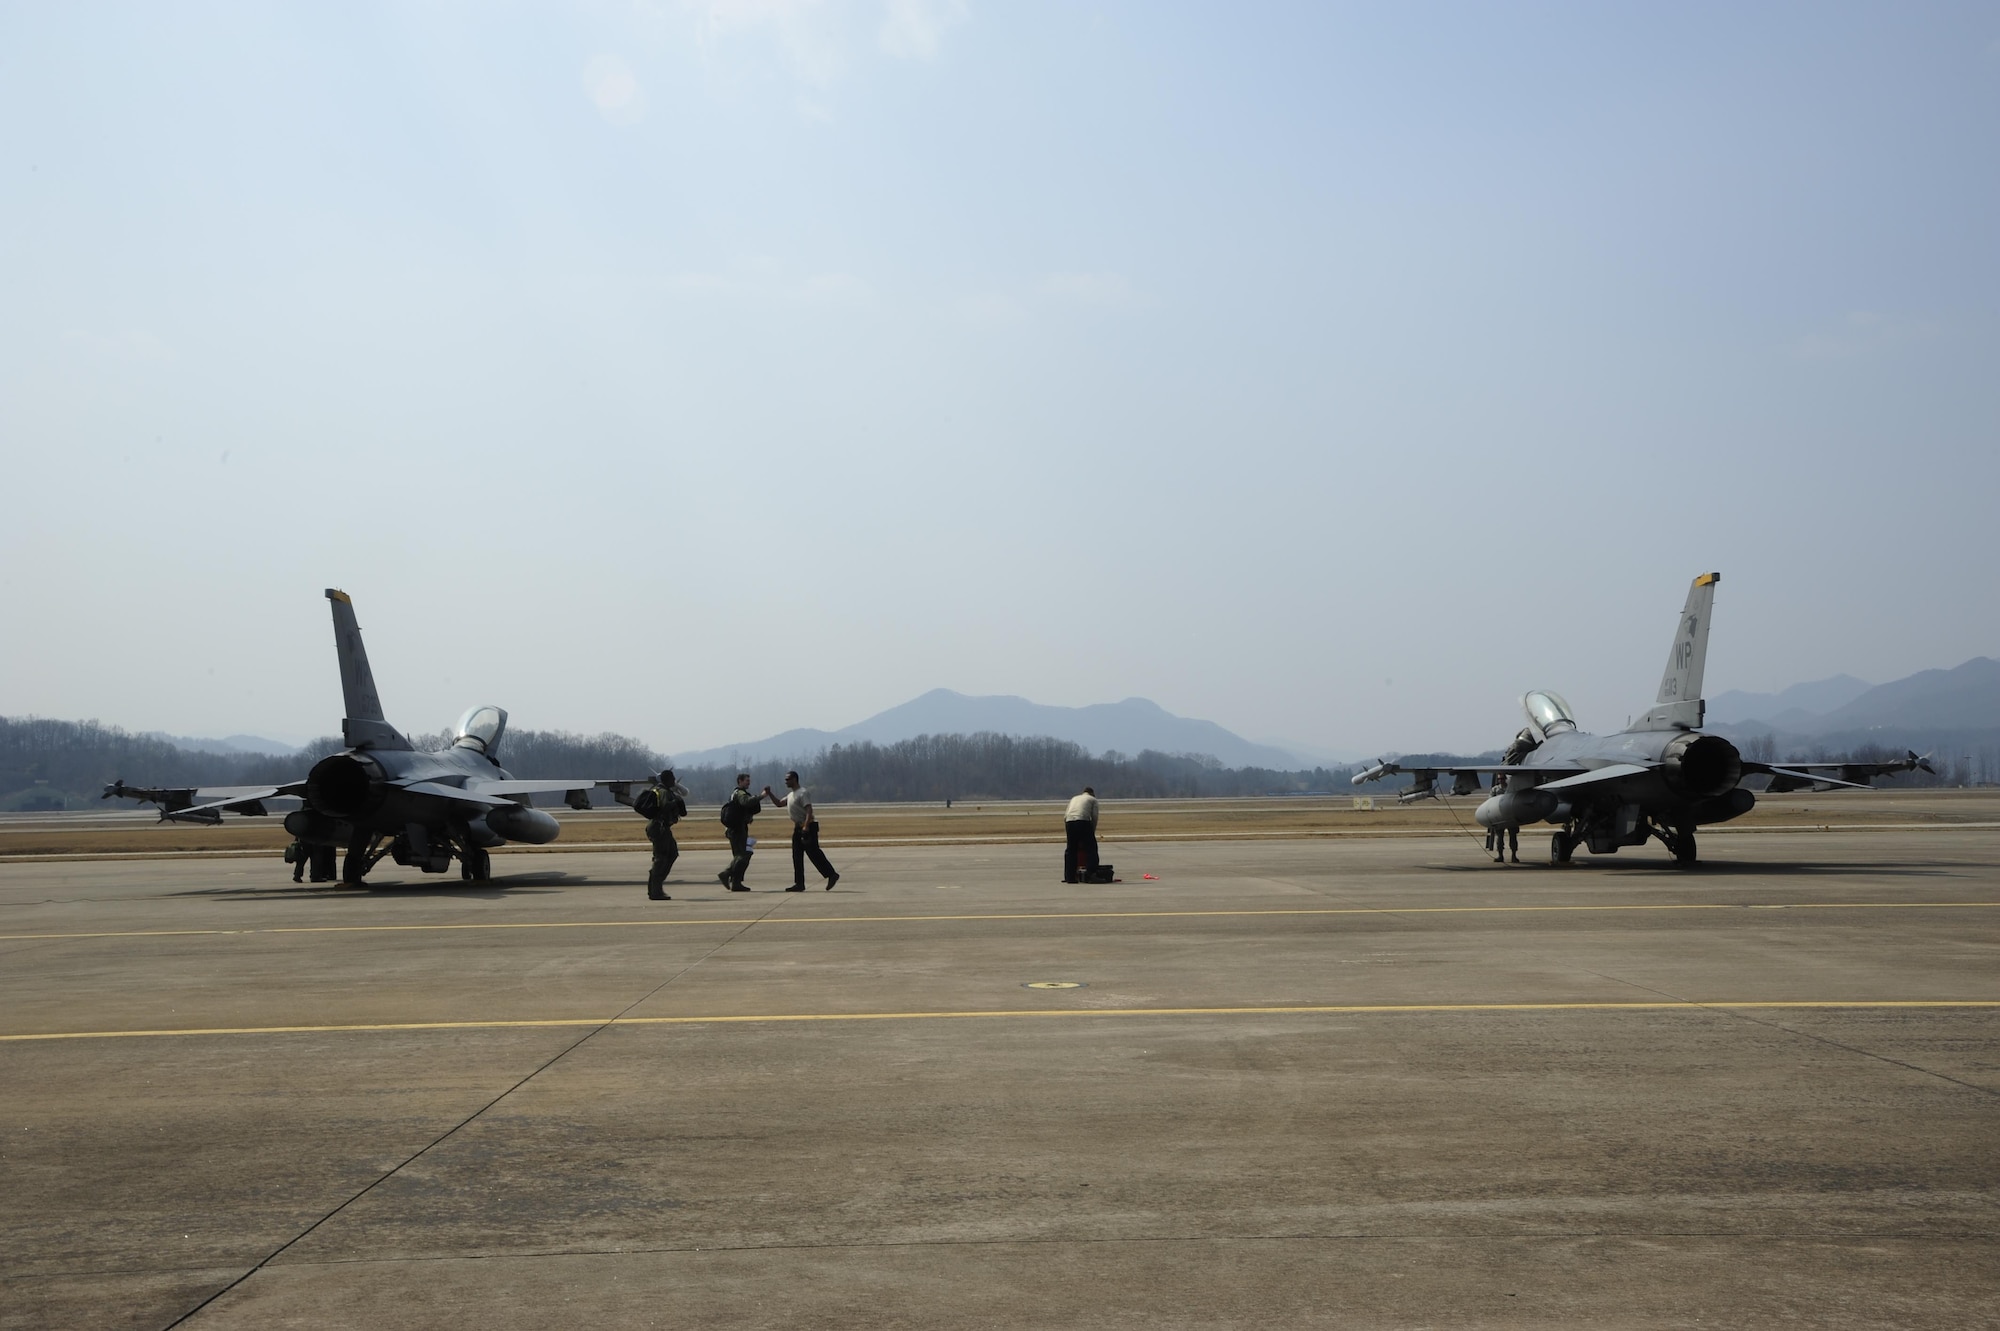 Airmen from the 80th Aircraft Maintenance Unit and pilots from the 80th Fighter Squadron greet one another before a post-flight inspection during Buddy Wing 16-3 at Jungwon Air Base, Republic of Korea, March 30, 2016. Buddy Wing training, held multiple times a year, polishes the ability of the Republic of Korea air force and U.S. Air Force Airmen to train and operate as a combined force. (U.S. Air Force photo by Staff Sgt. Nick Wilson/Released)